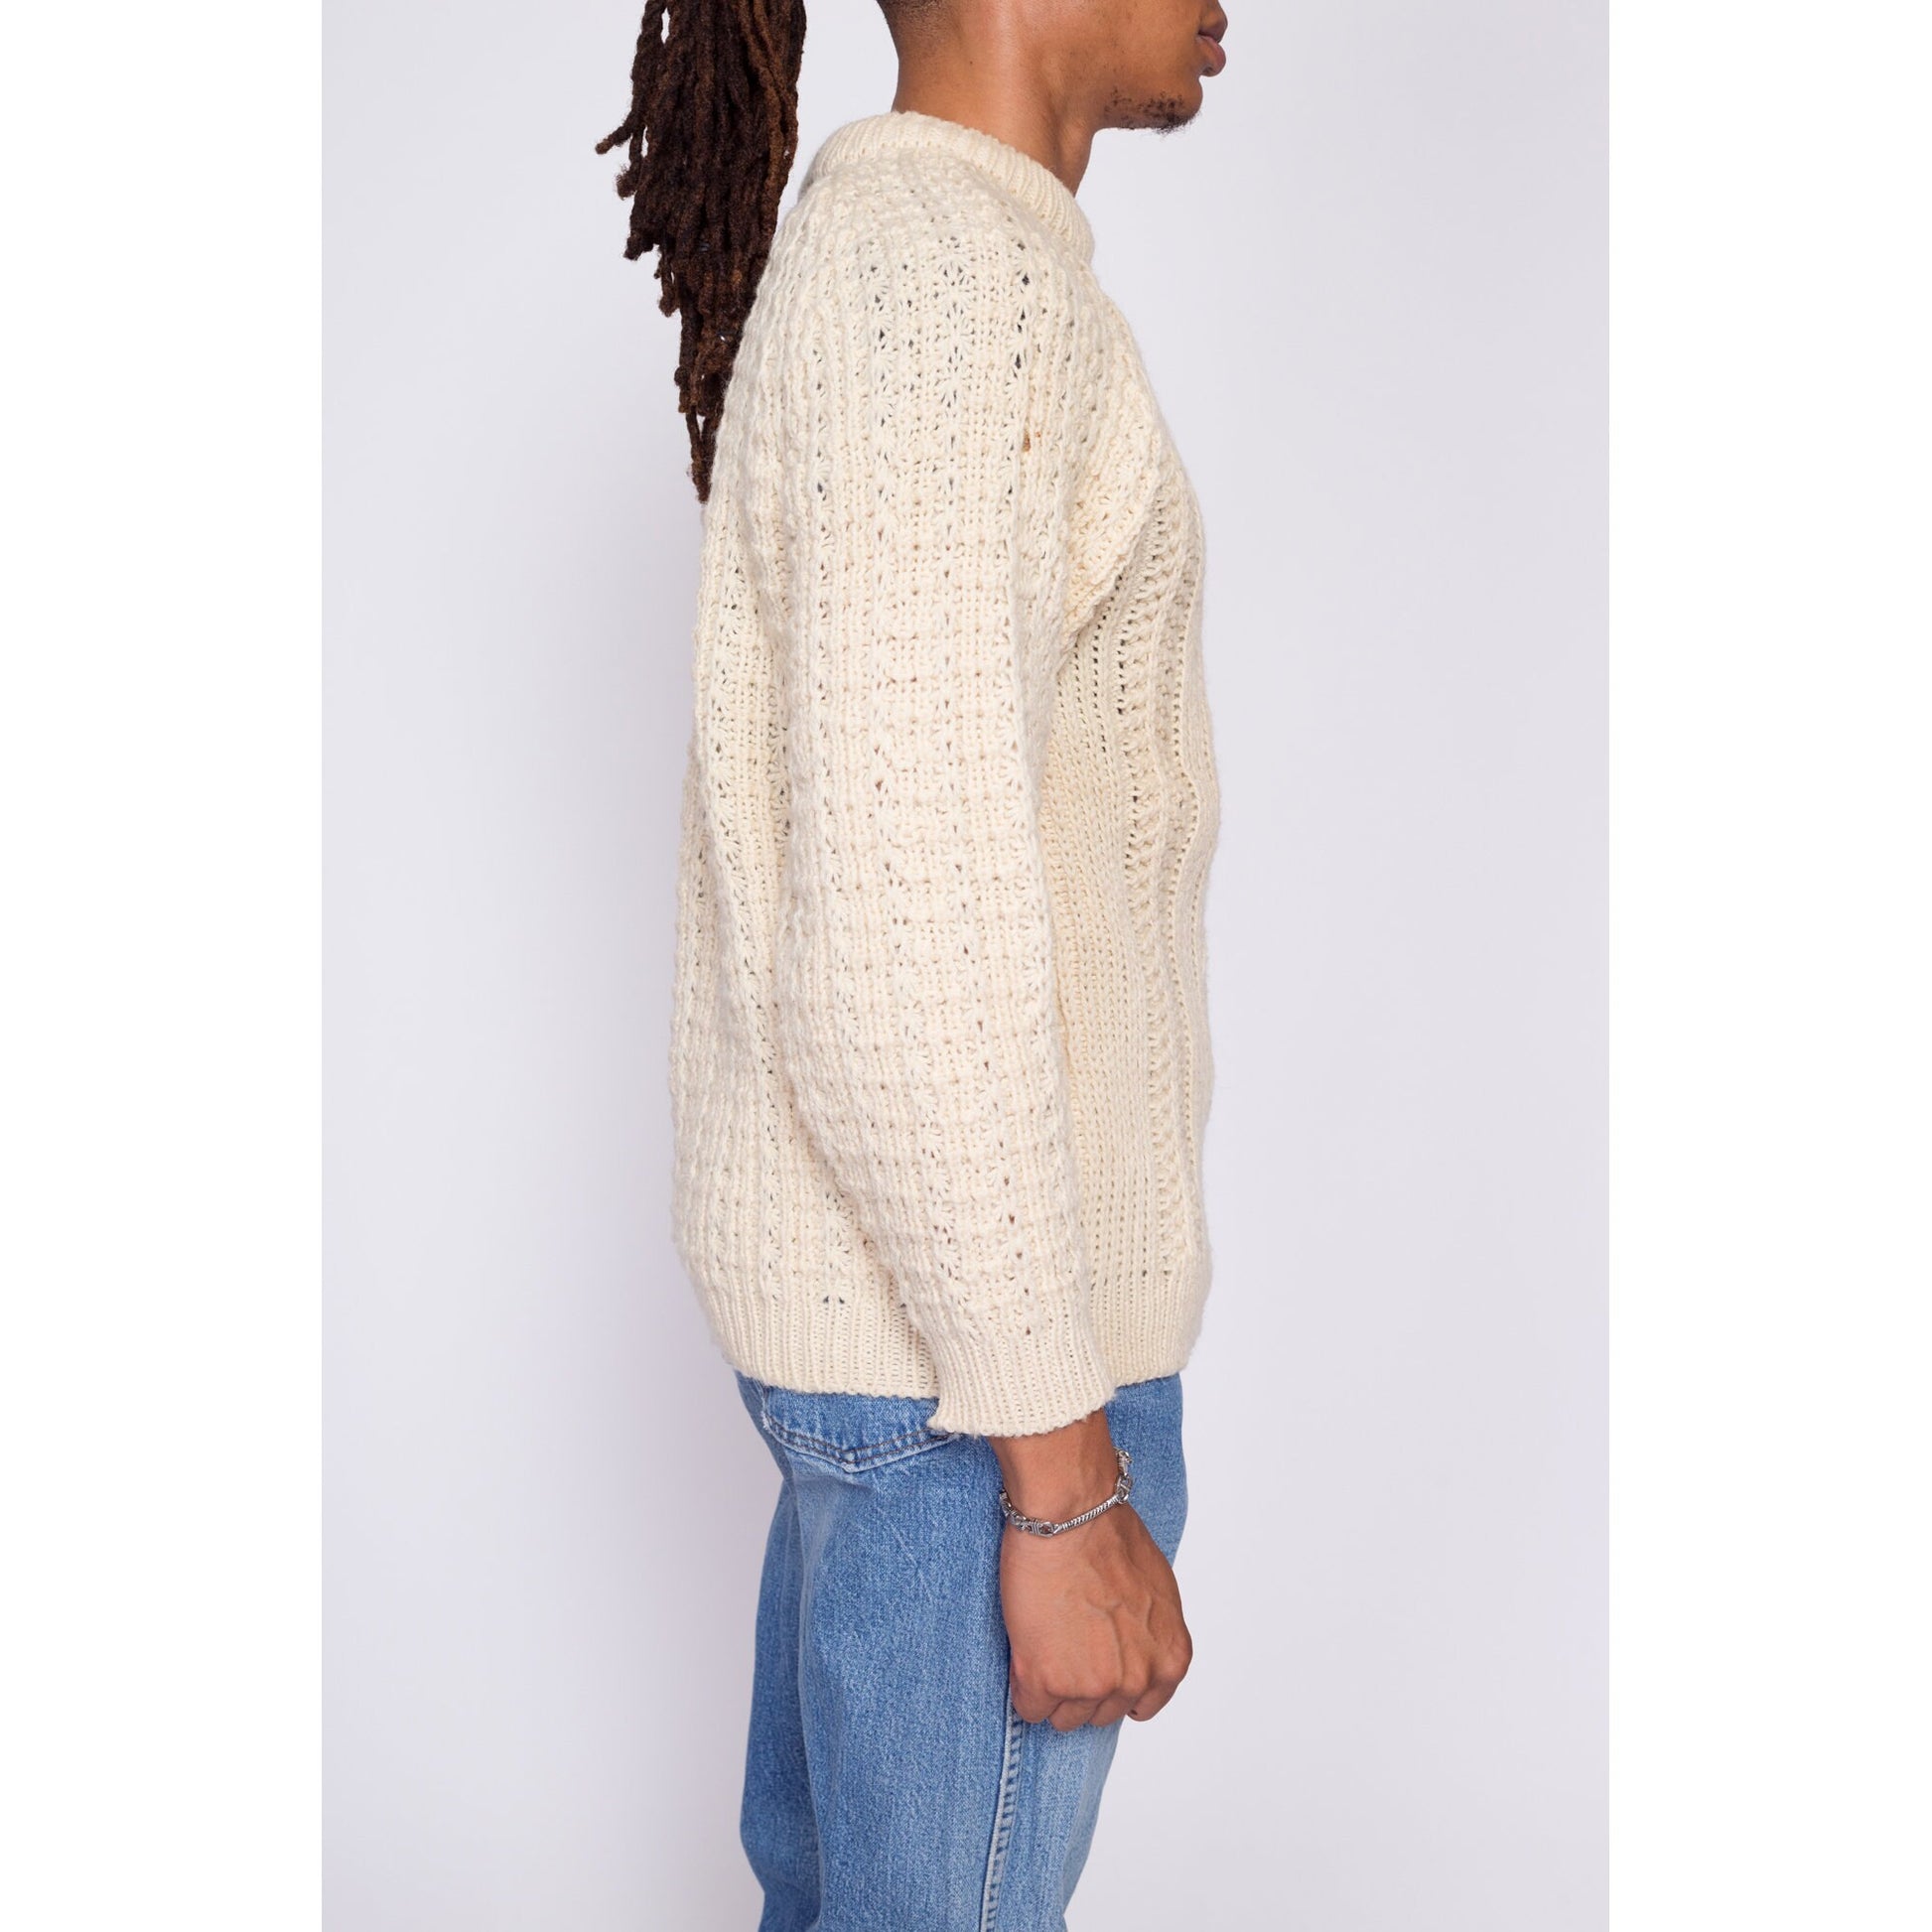 70s McRitchie Of Edinburgh Cable Knit Sweater - Men's Small Short | Vintage Cream Wool Fisherman Pullover Jumper